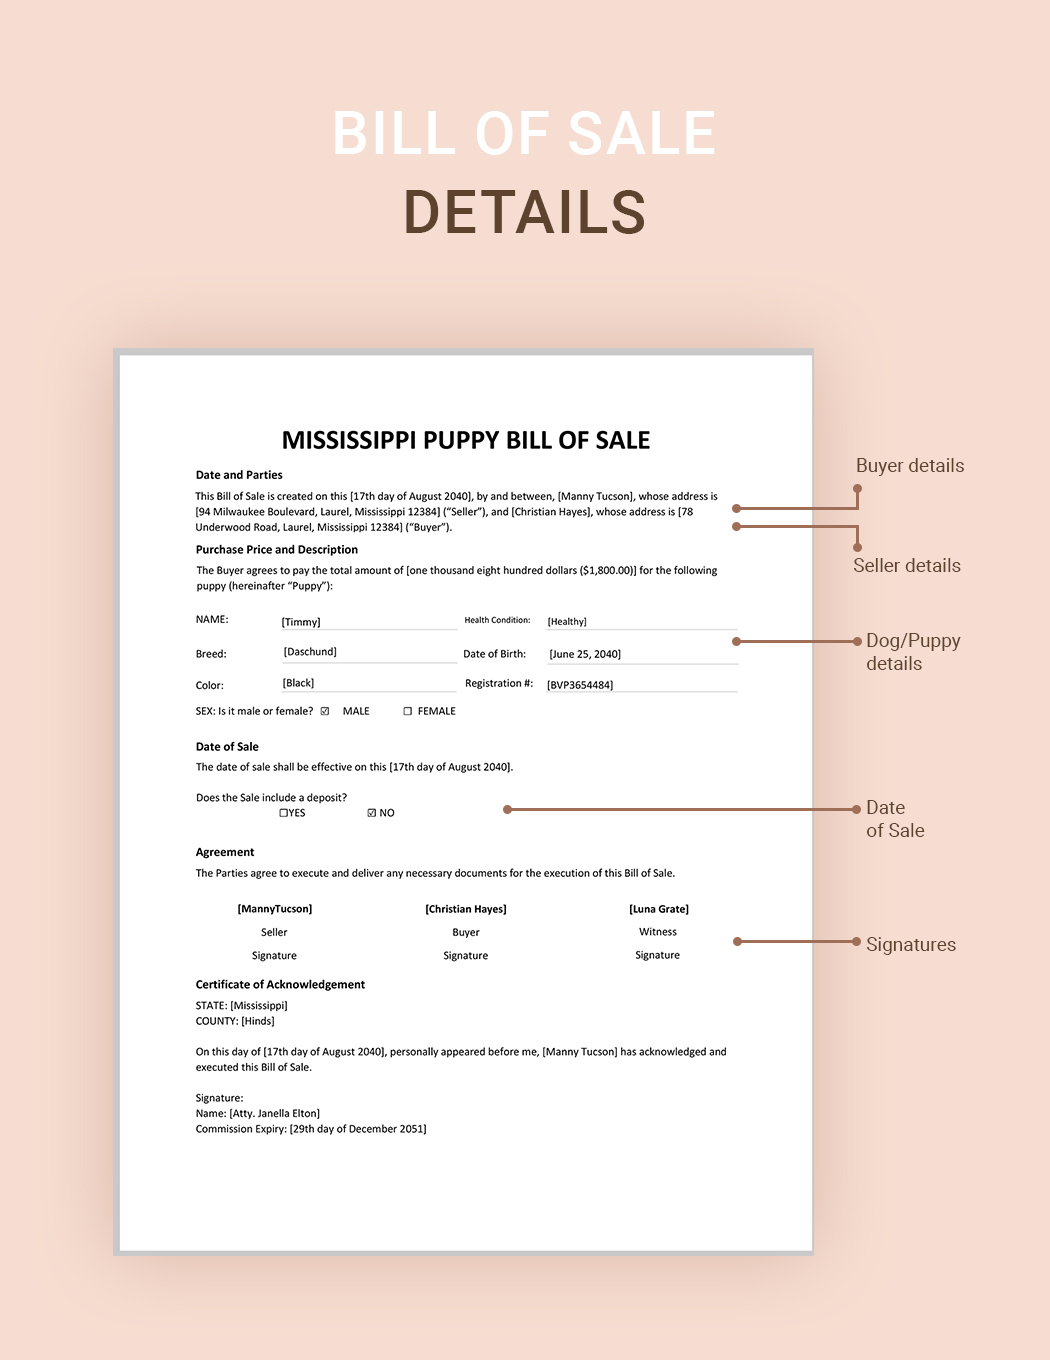 Mississippi Dog  Puppy / Bill of Sale Template